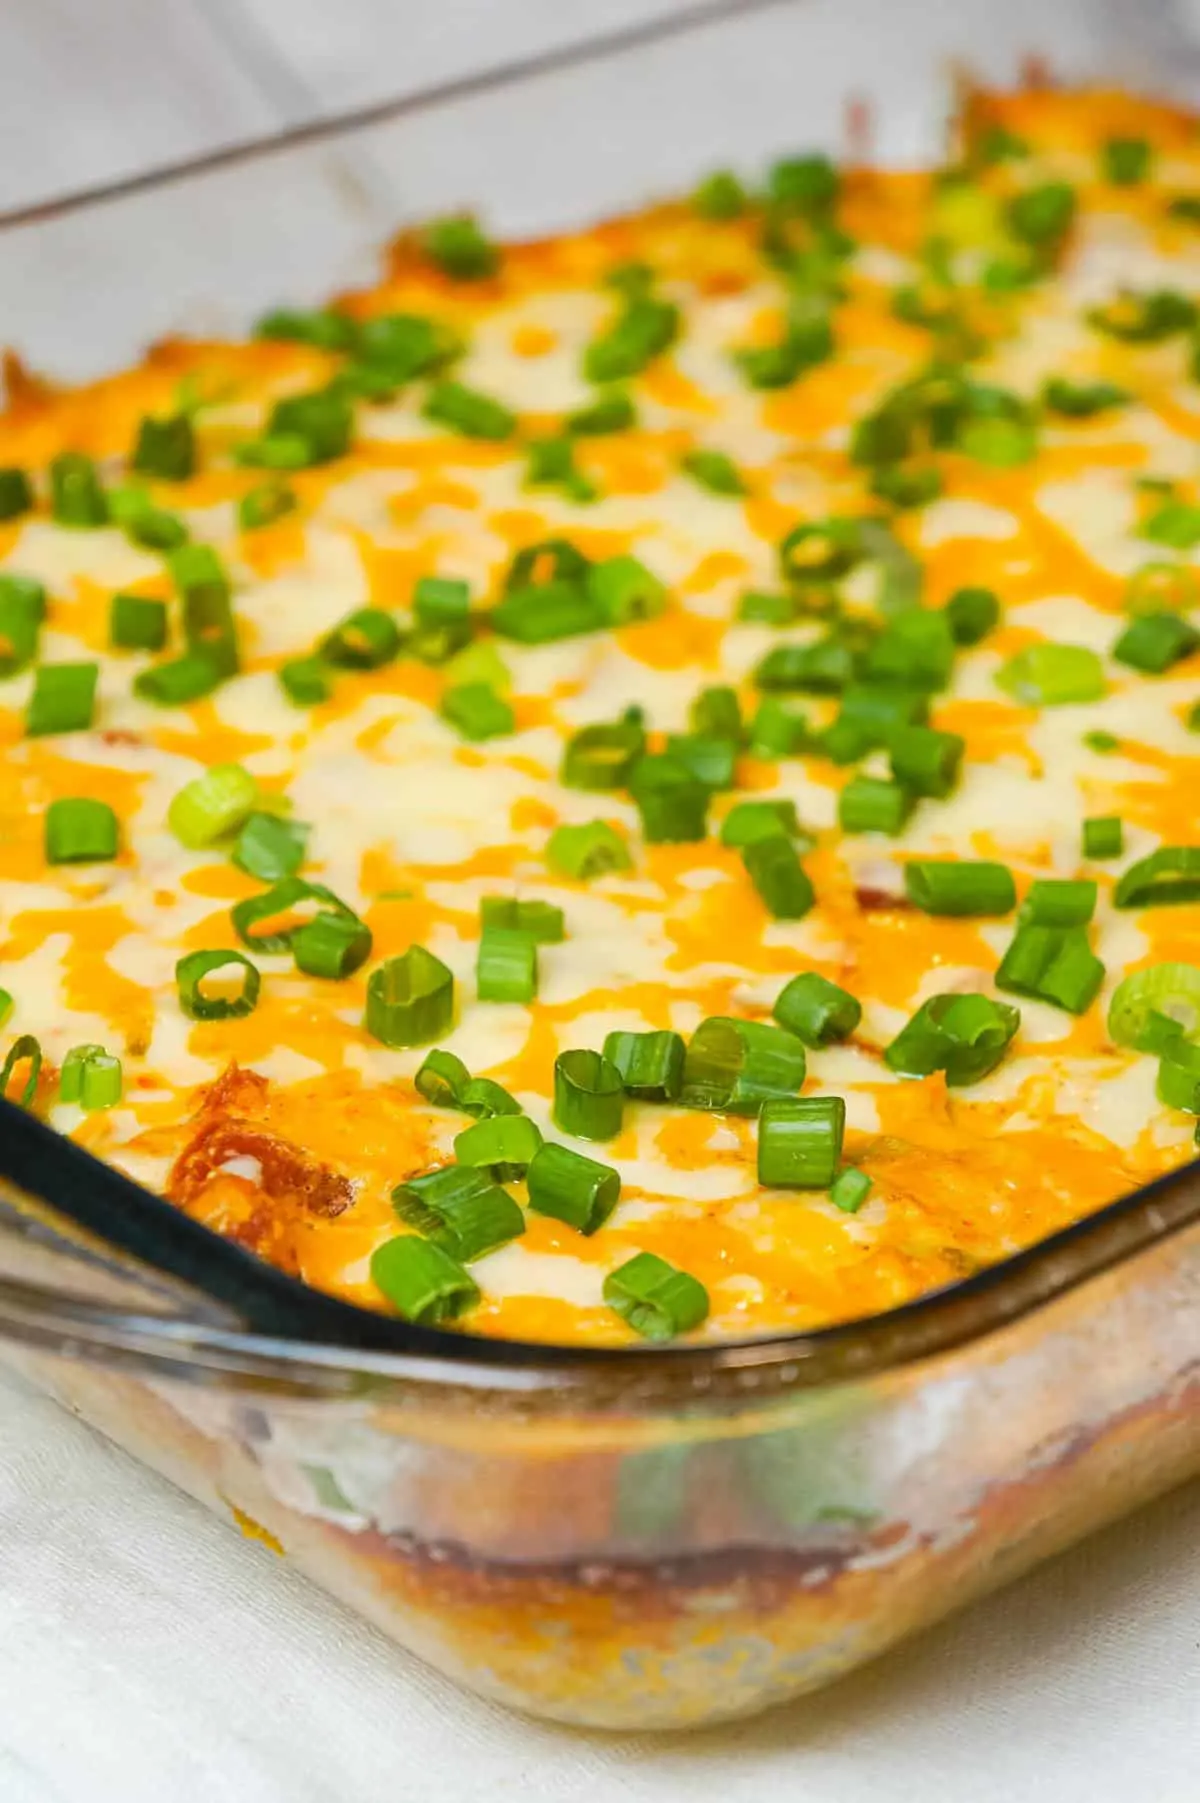 Mexican Chicken Casserole is an easy dinner recipe loaded with Minute rice, shredded rotisserie chicken, Rotel diced tomatoes and green chilies, sour cream and shredded cheese.